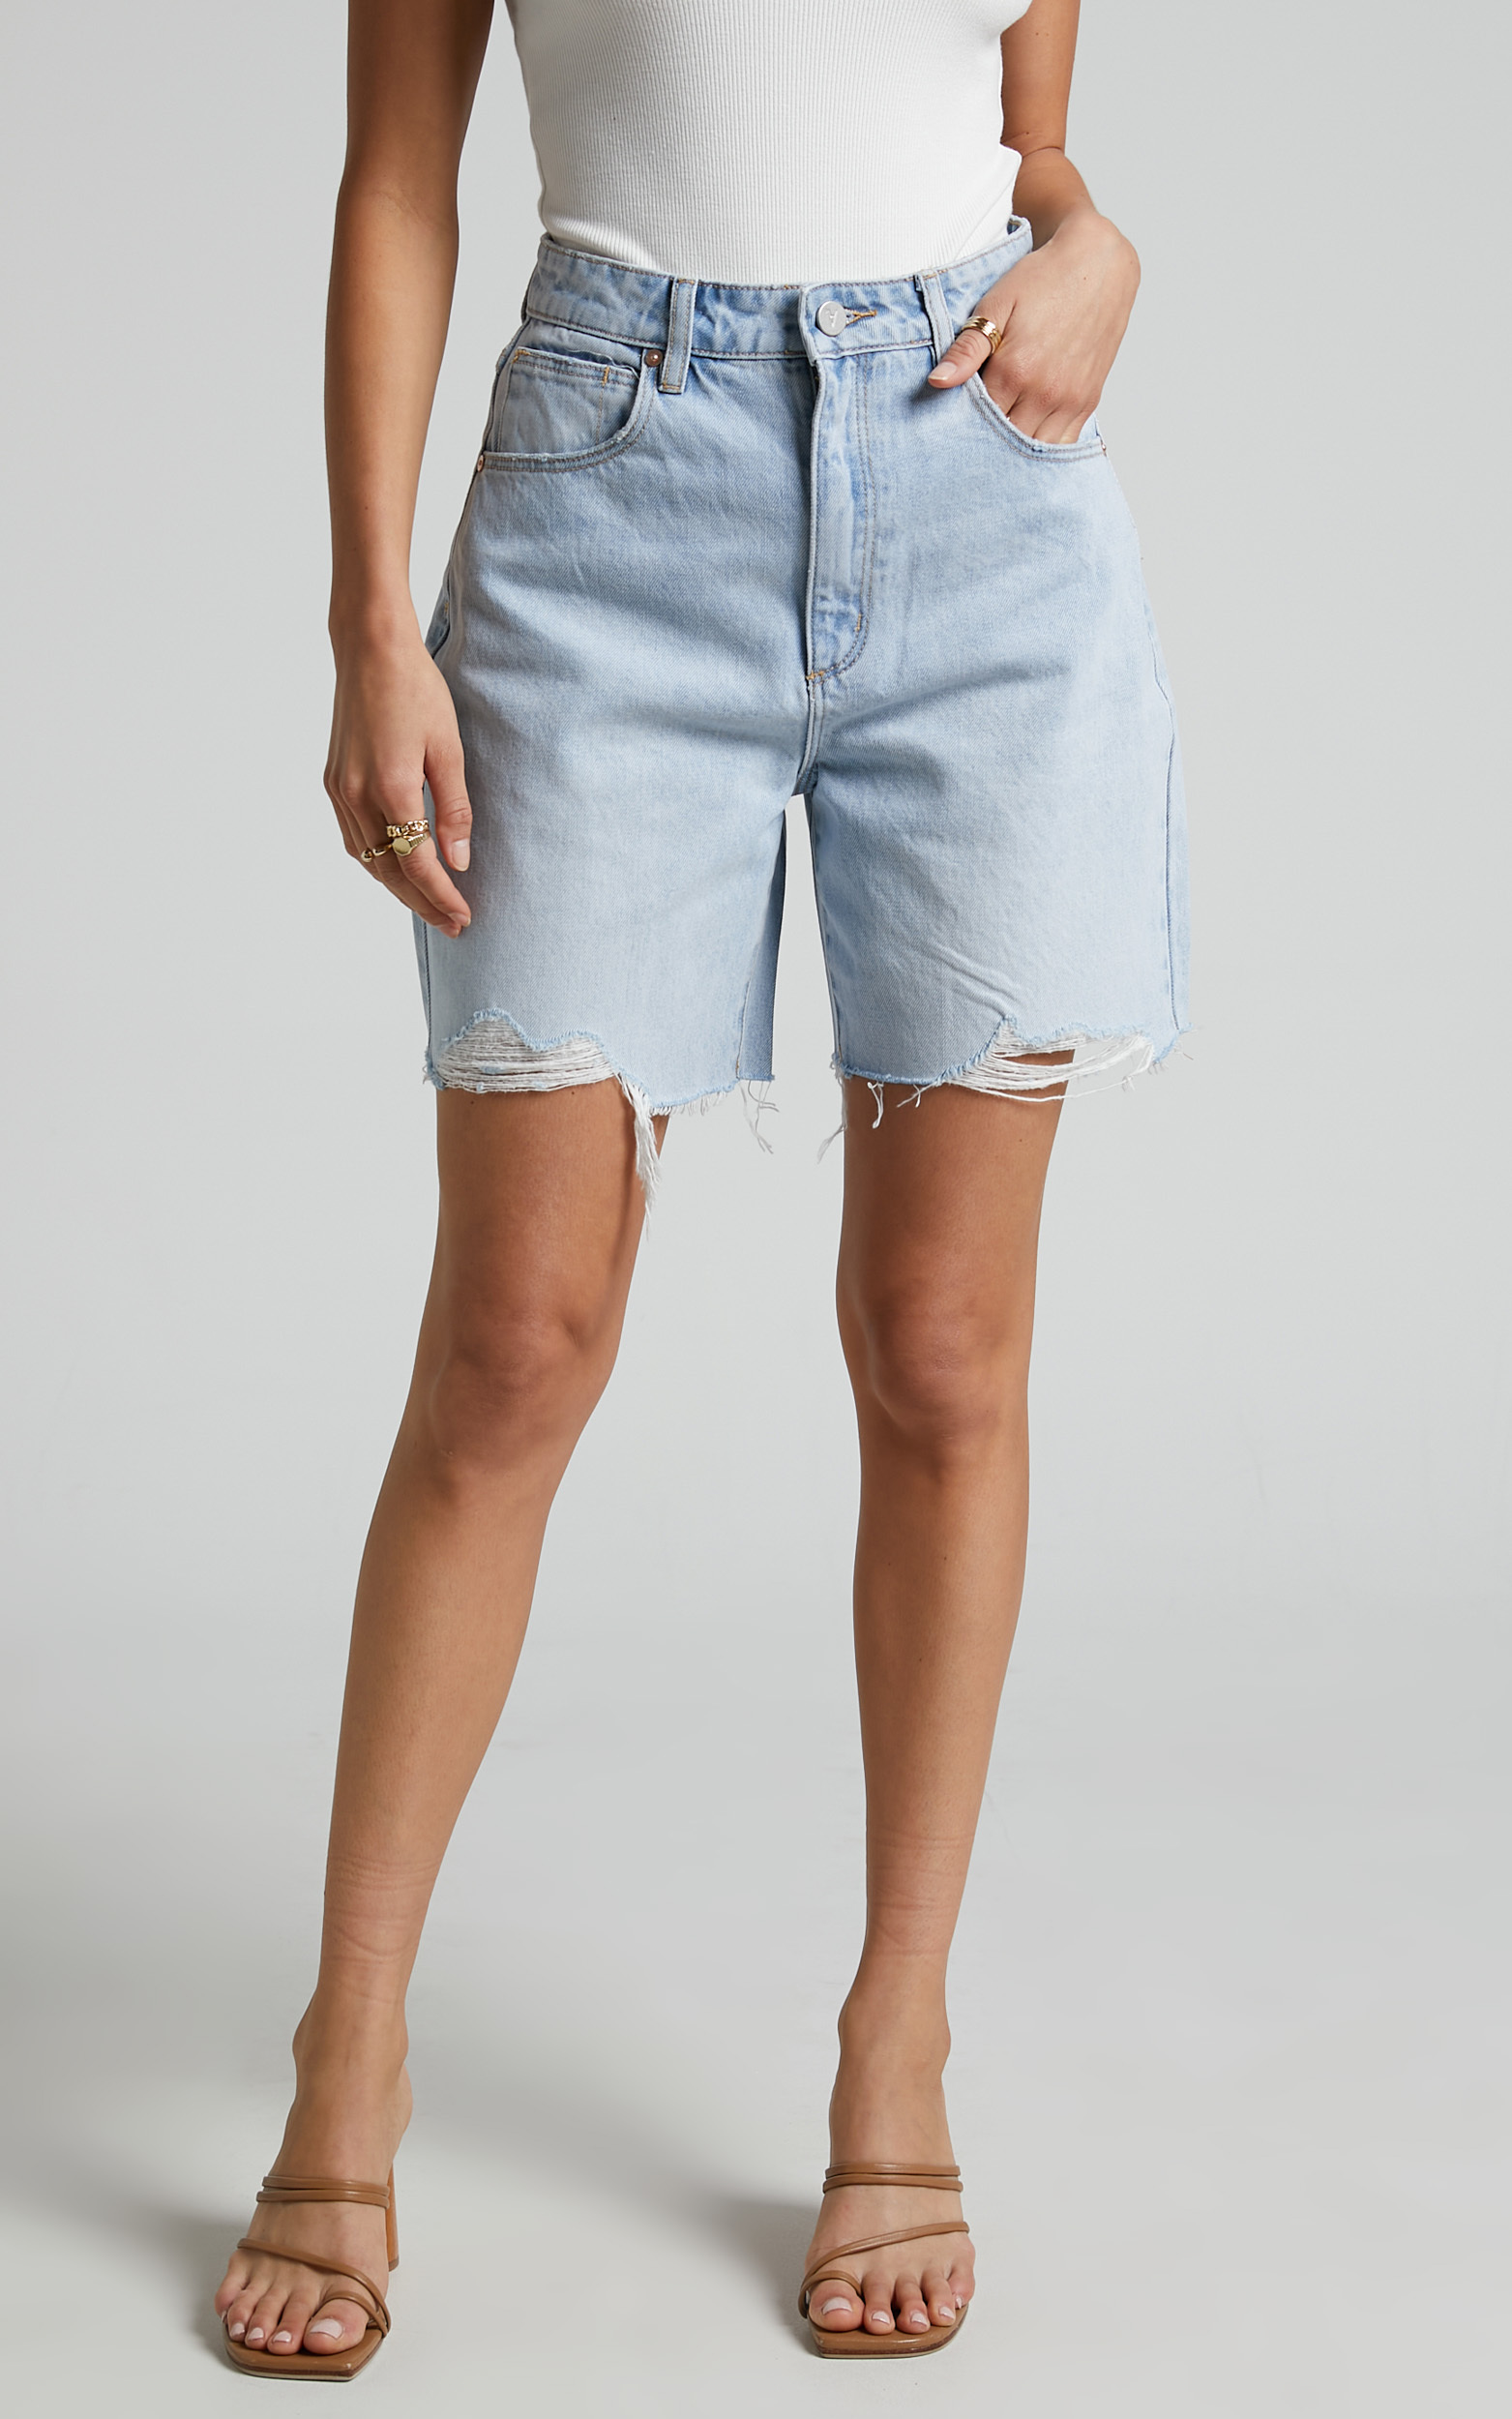 Abrand - A Carrie Denim Short in Rosanna - 06, BLU1, hi-res image number null